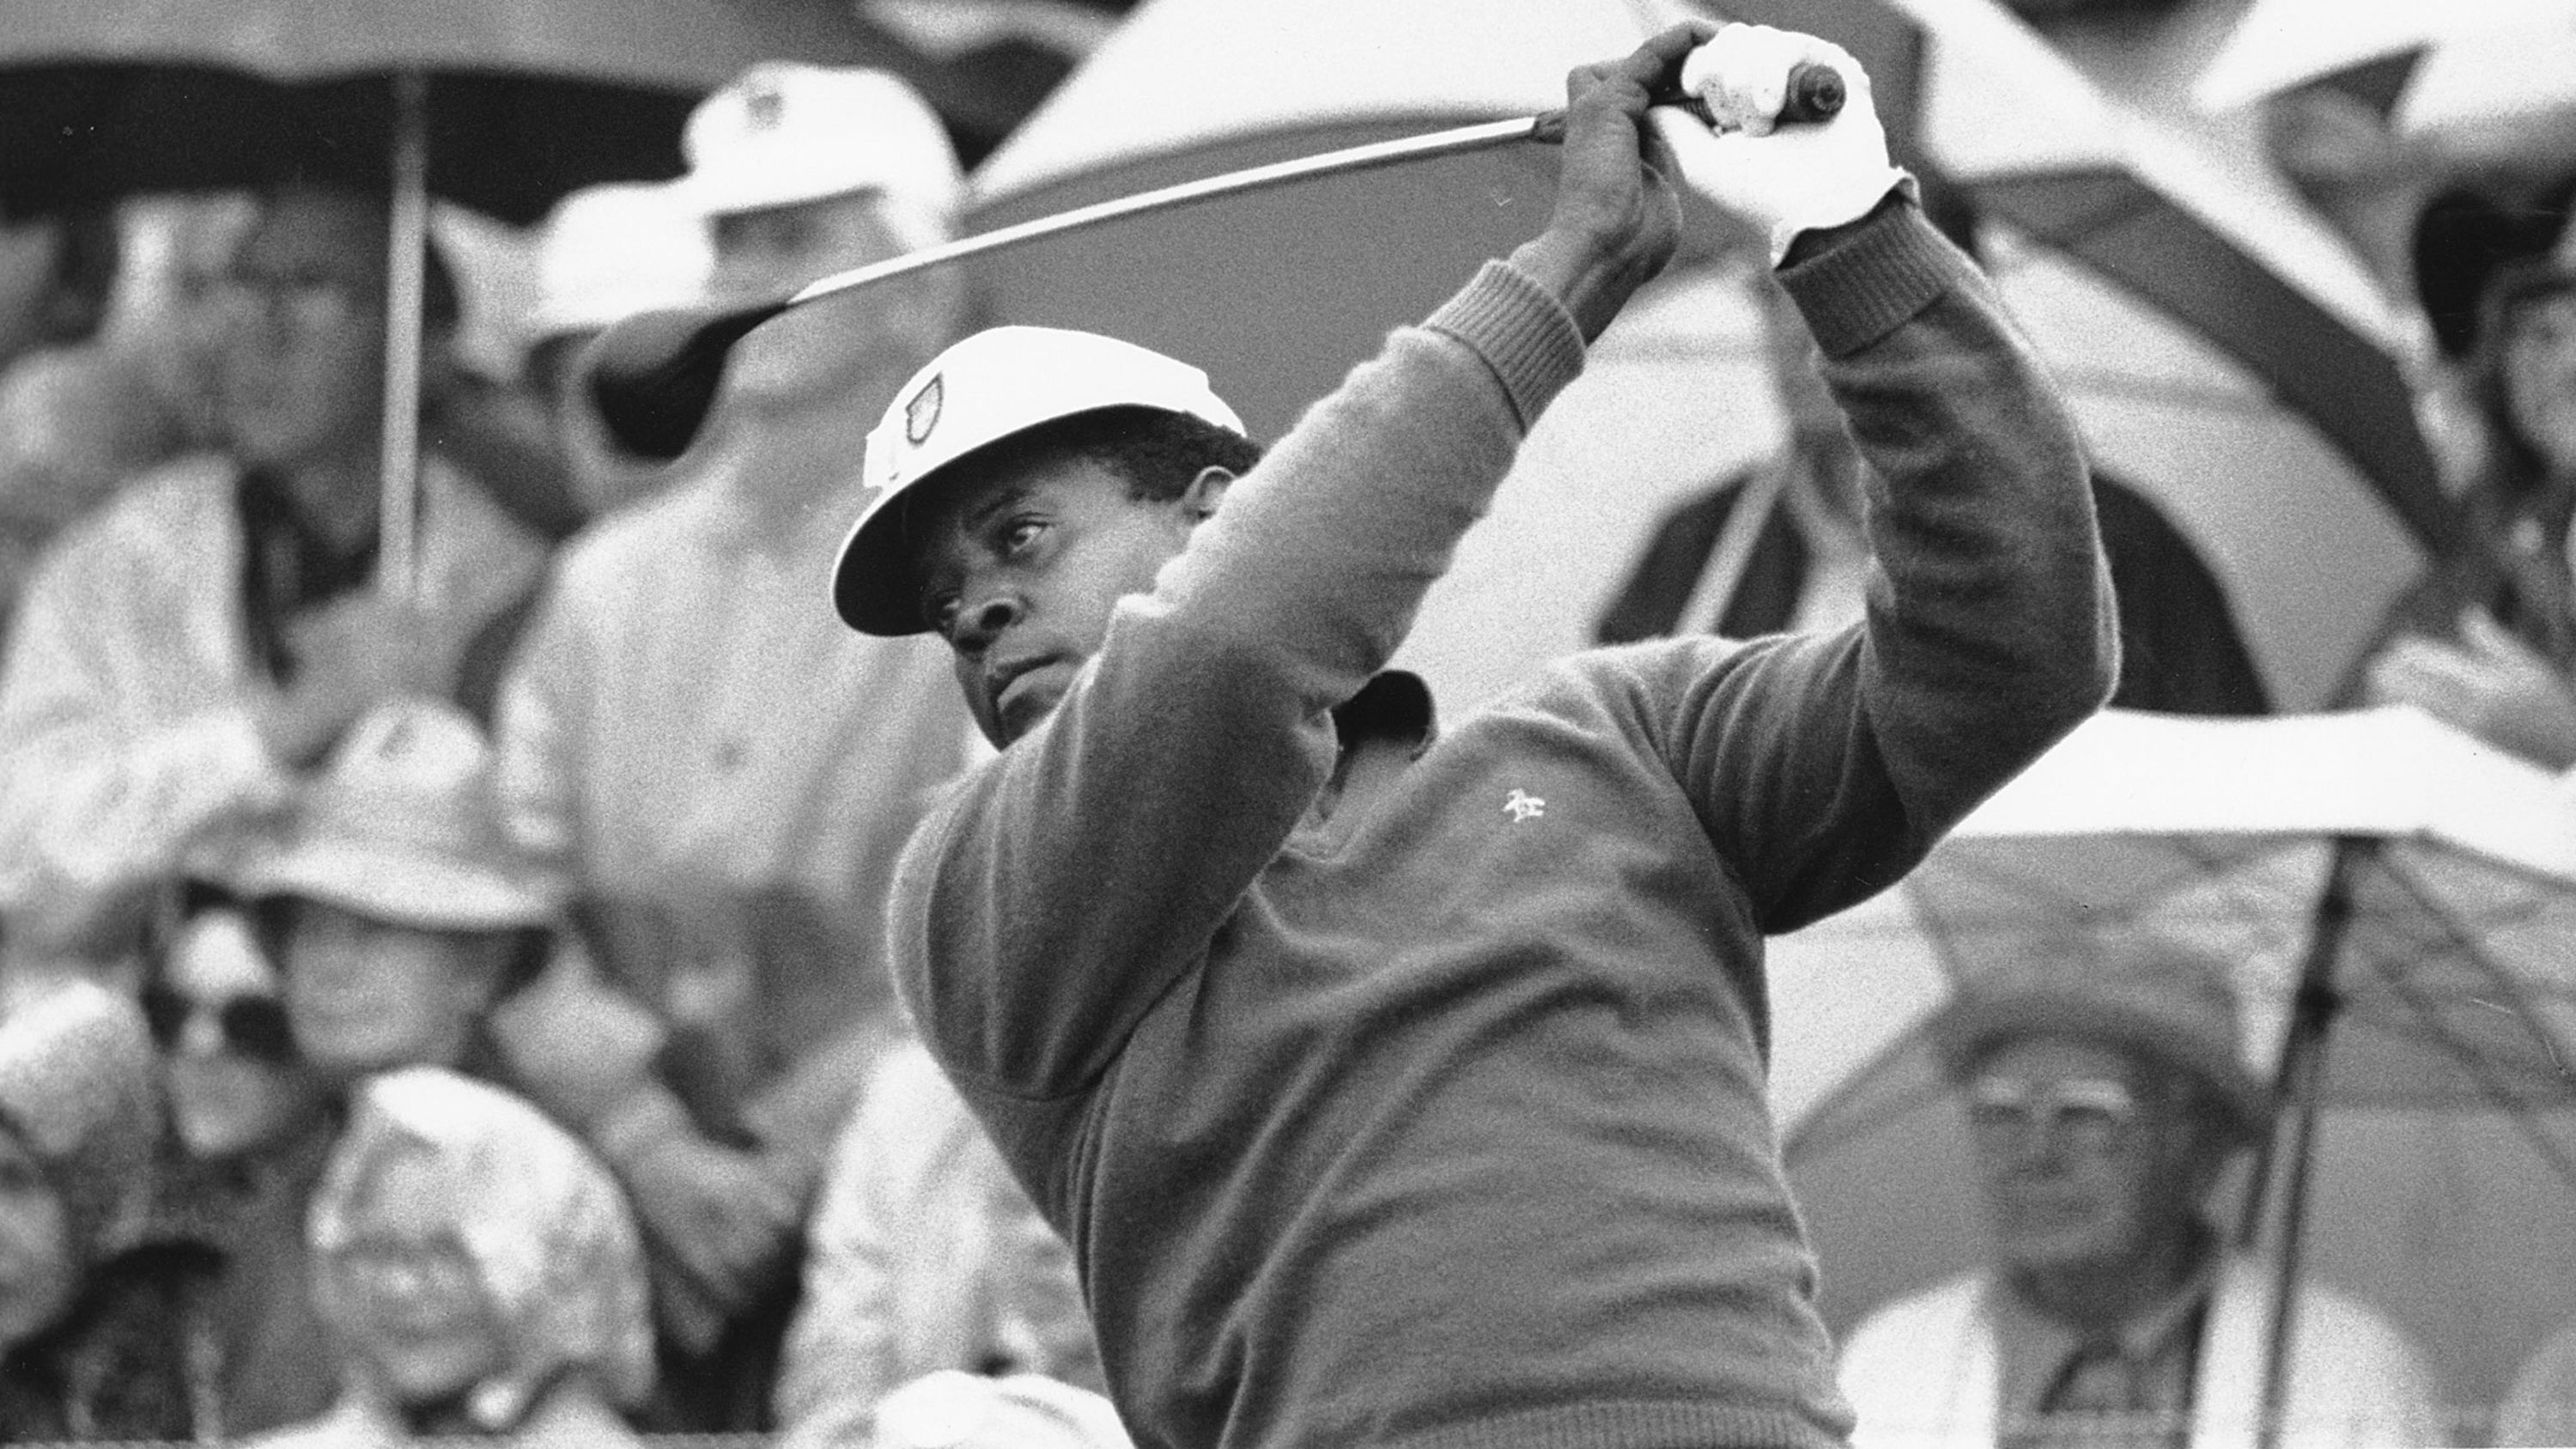 Lee Elder watches the flight of his ball as he tees off at the Masters in 1975. Elder <a href="https://www.cnn.com/2015/04/08/golf/golf-masters-lee-elder/index.html" target="_blank">told CNN in 2015</a> that making his Masters debut was a "very nerve-racking" experience. "I was shaking so badly, I did not know if I was even going to be able to tee up the ball," he said.